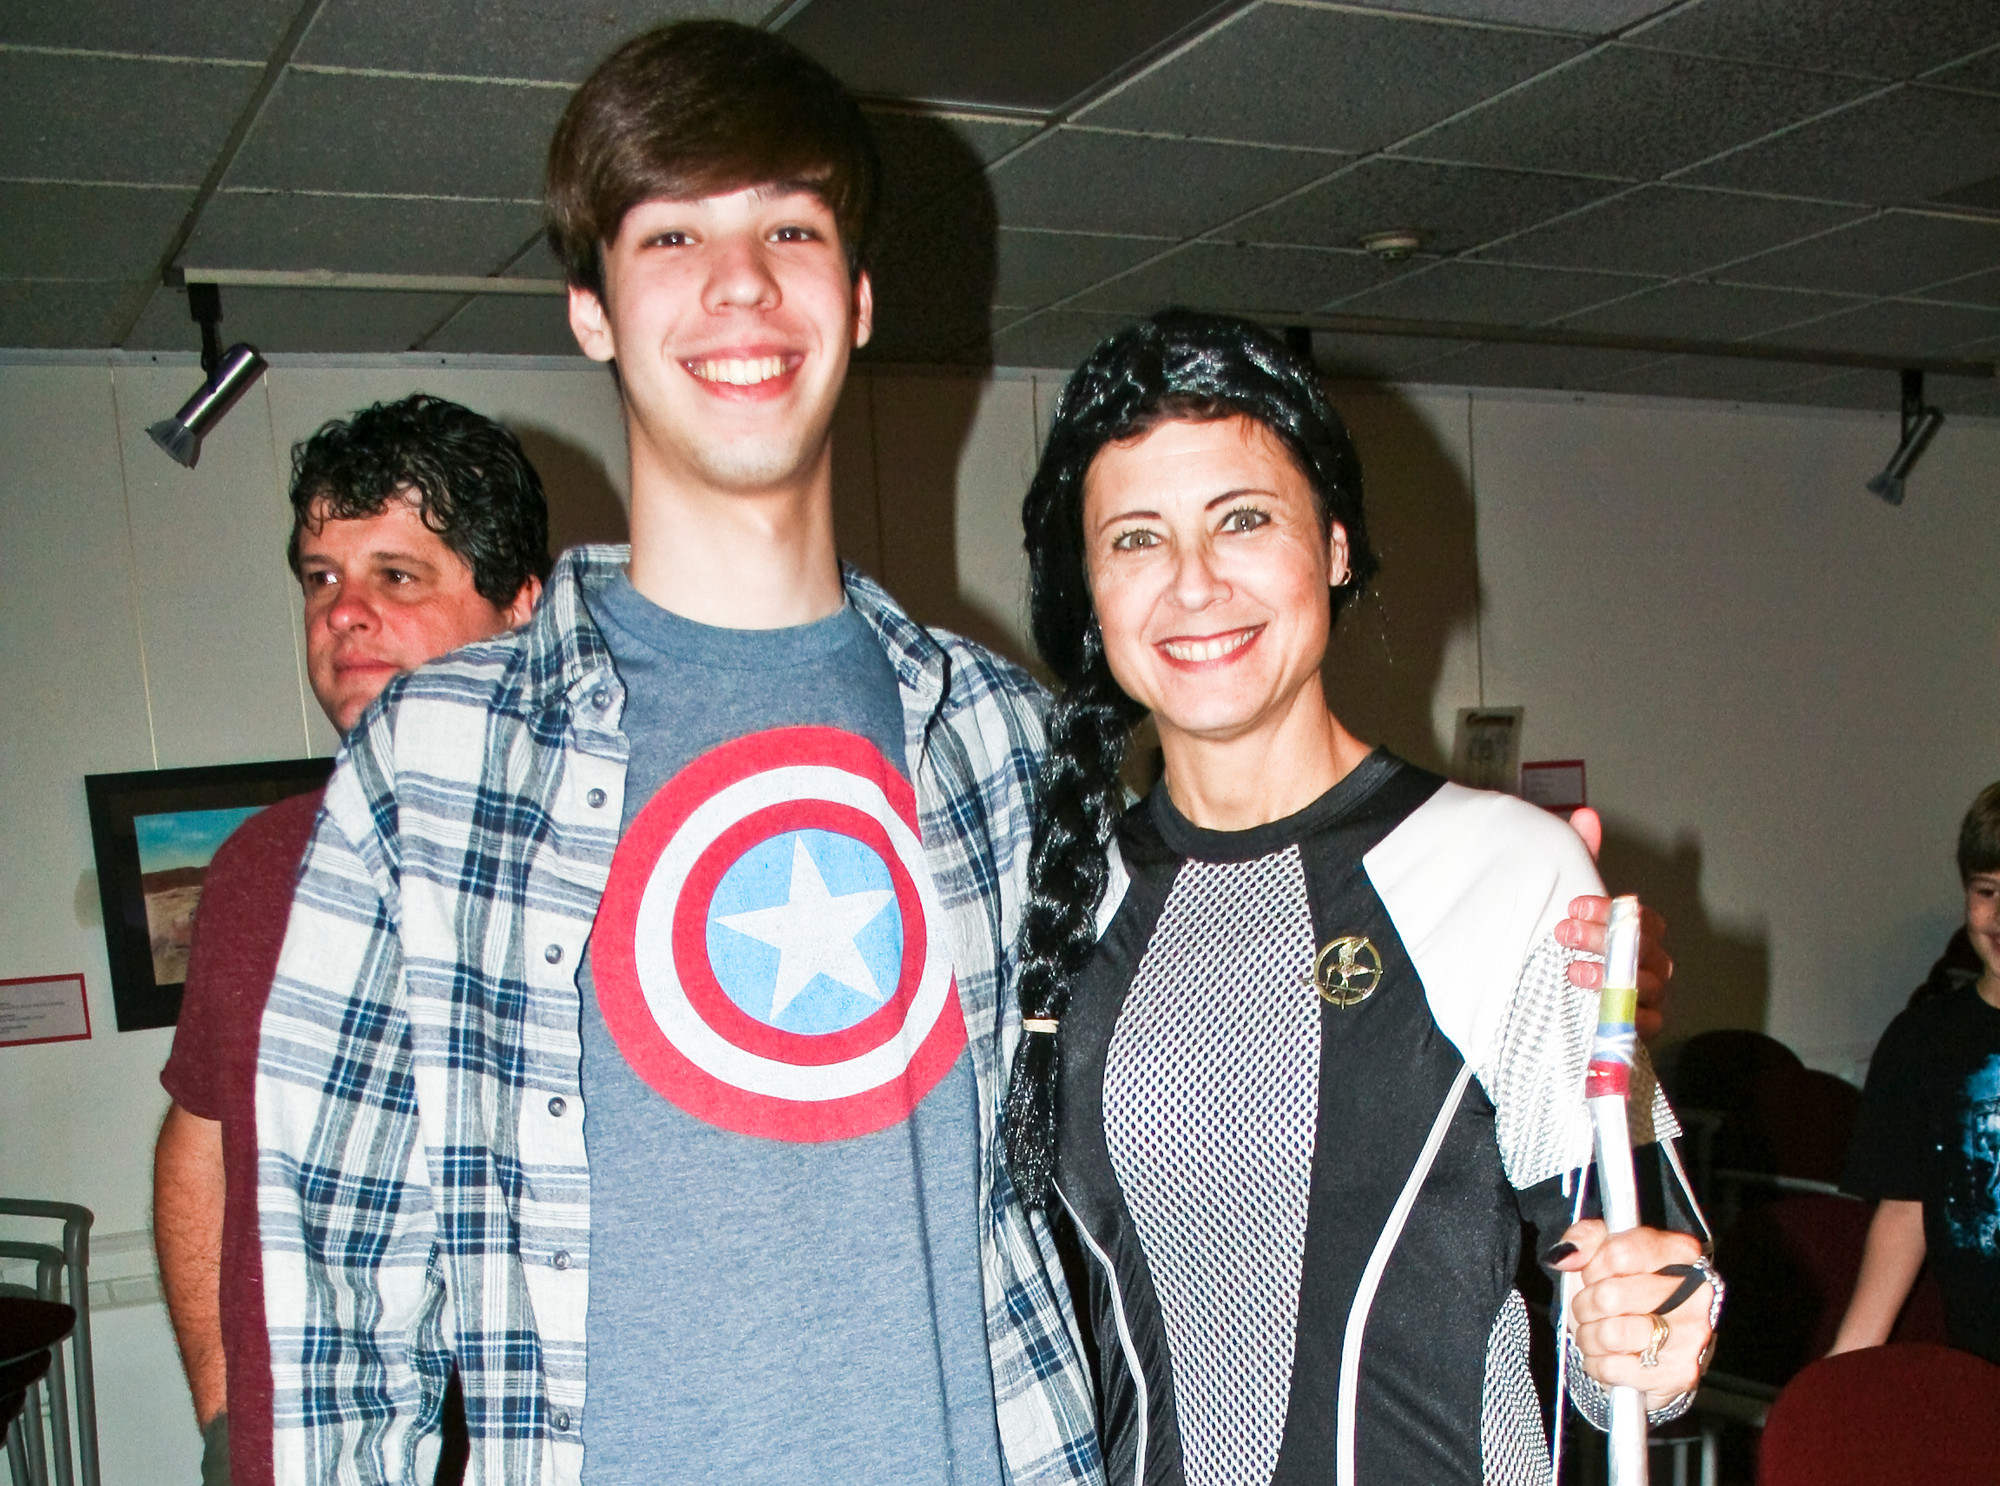 Will and Donna Rosenblum represented some of their favorite characters: Marvel’s Captain America and Katniss Everdeen of “The Hunger Games.” Donna Rosenblum is president of the Merrick Library Board.